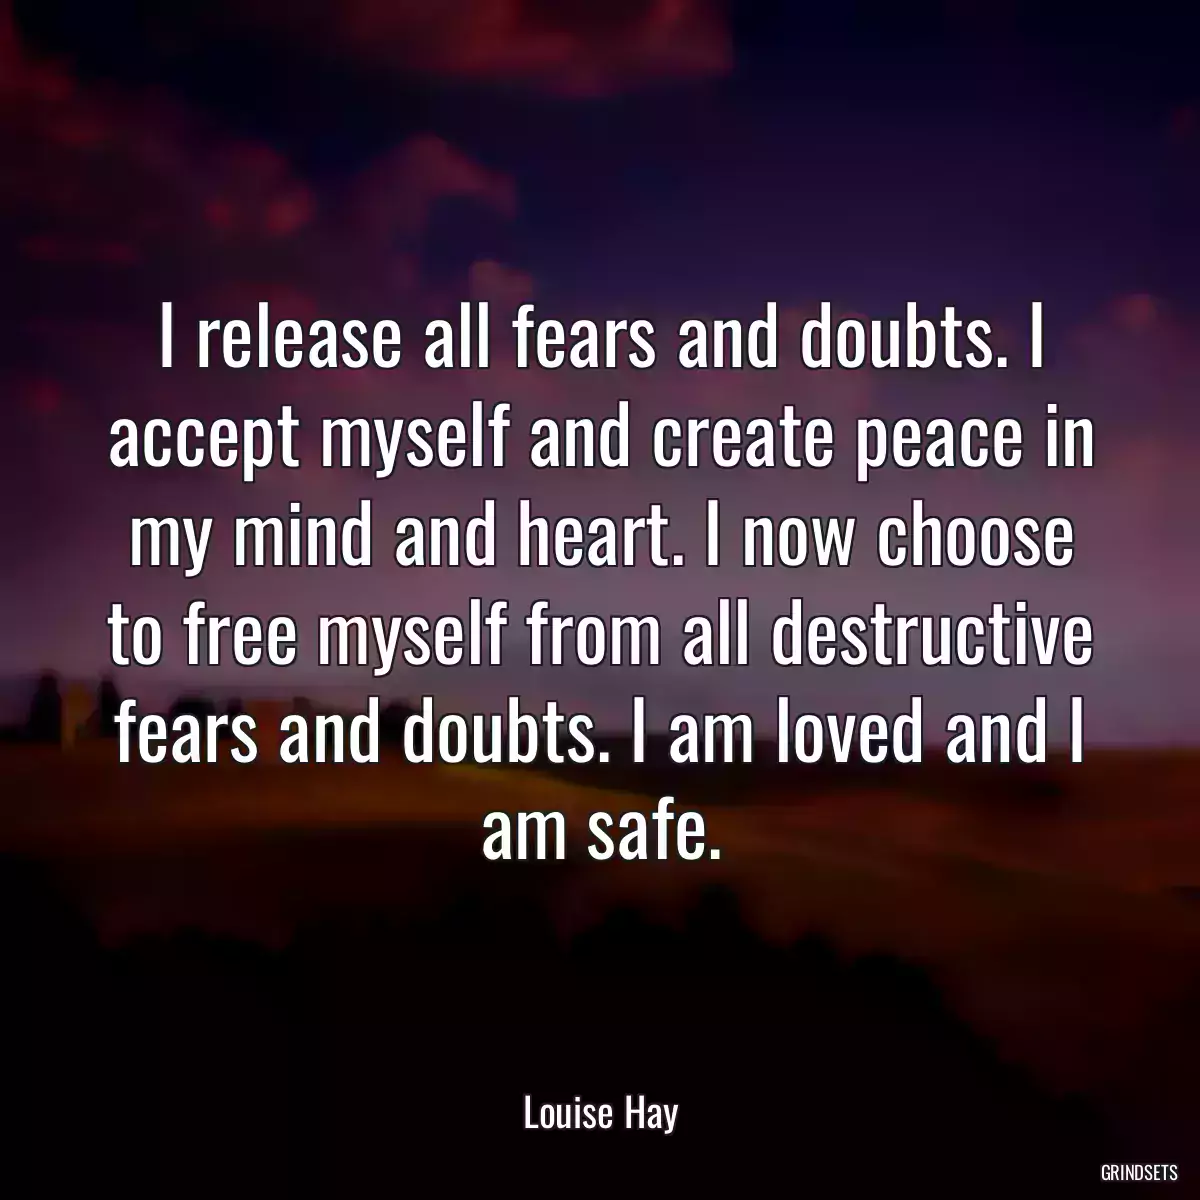 I release all fears and doubts. I accept myself and create peace in my mind and heart. I now choose to free myself from all destructive fears and doubts. I am loved and I am safe.